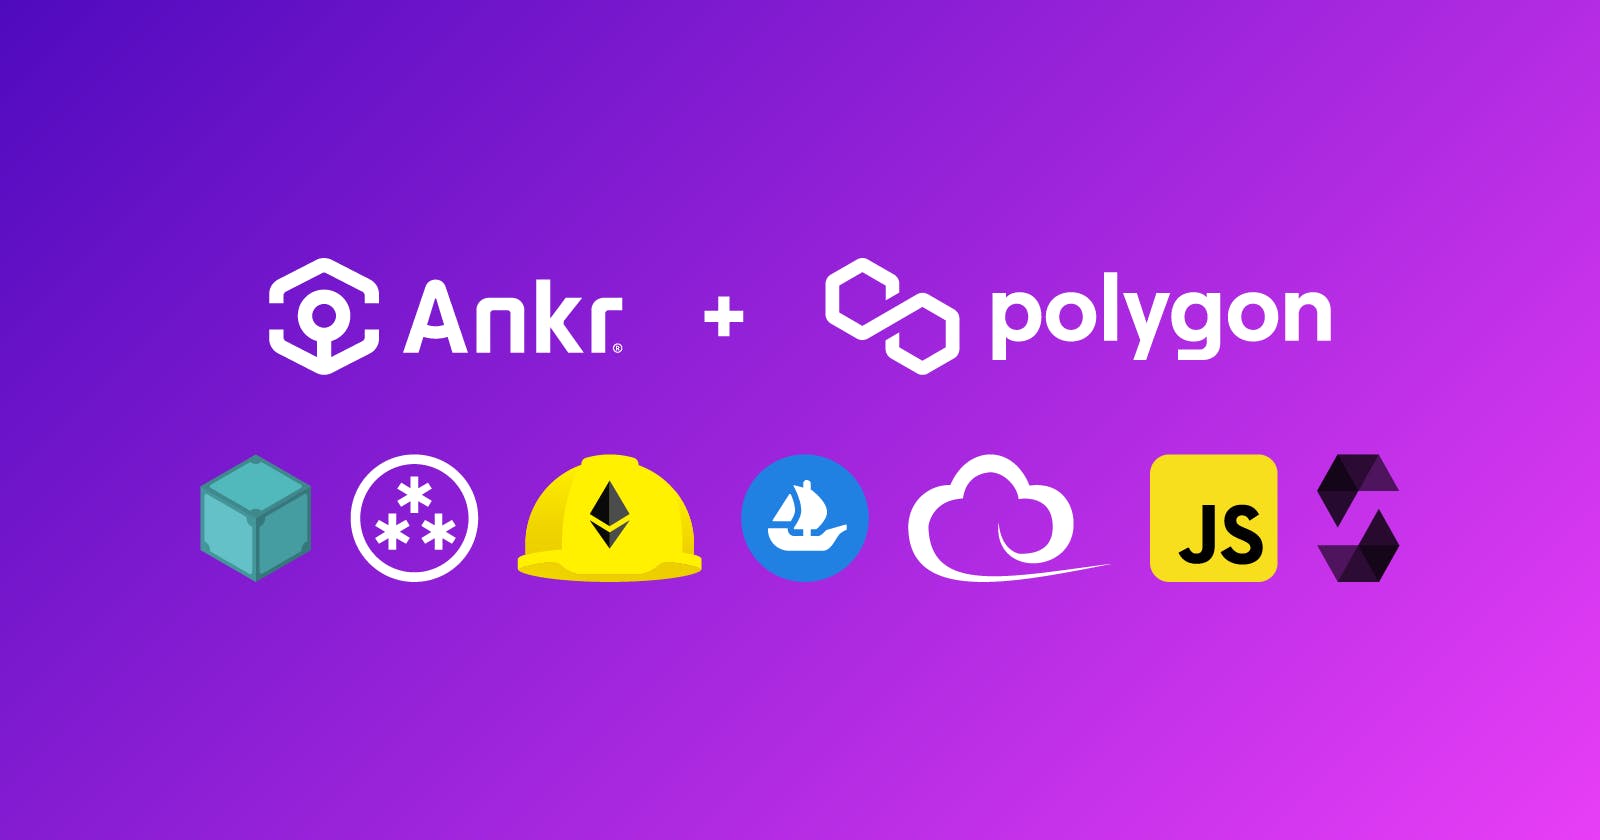 How to Deploy Your First Polygon NFT with an ERC-721 Solidity Smart Contract and Ankr